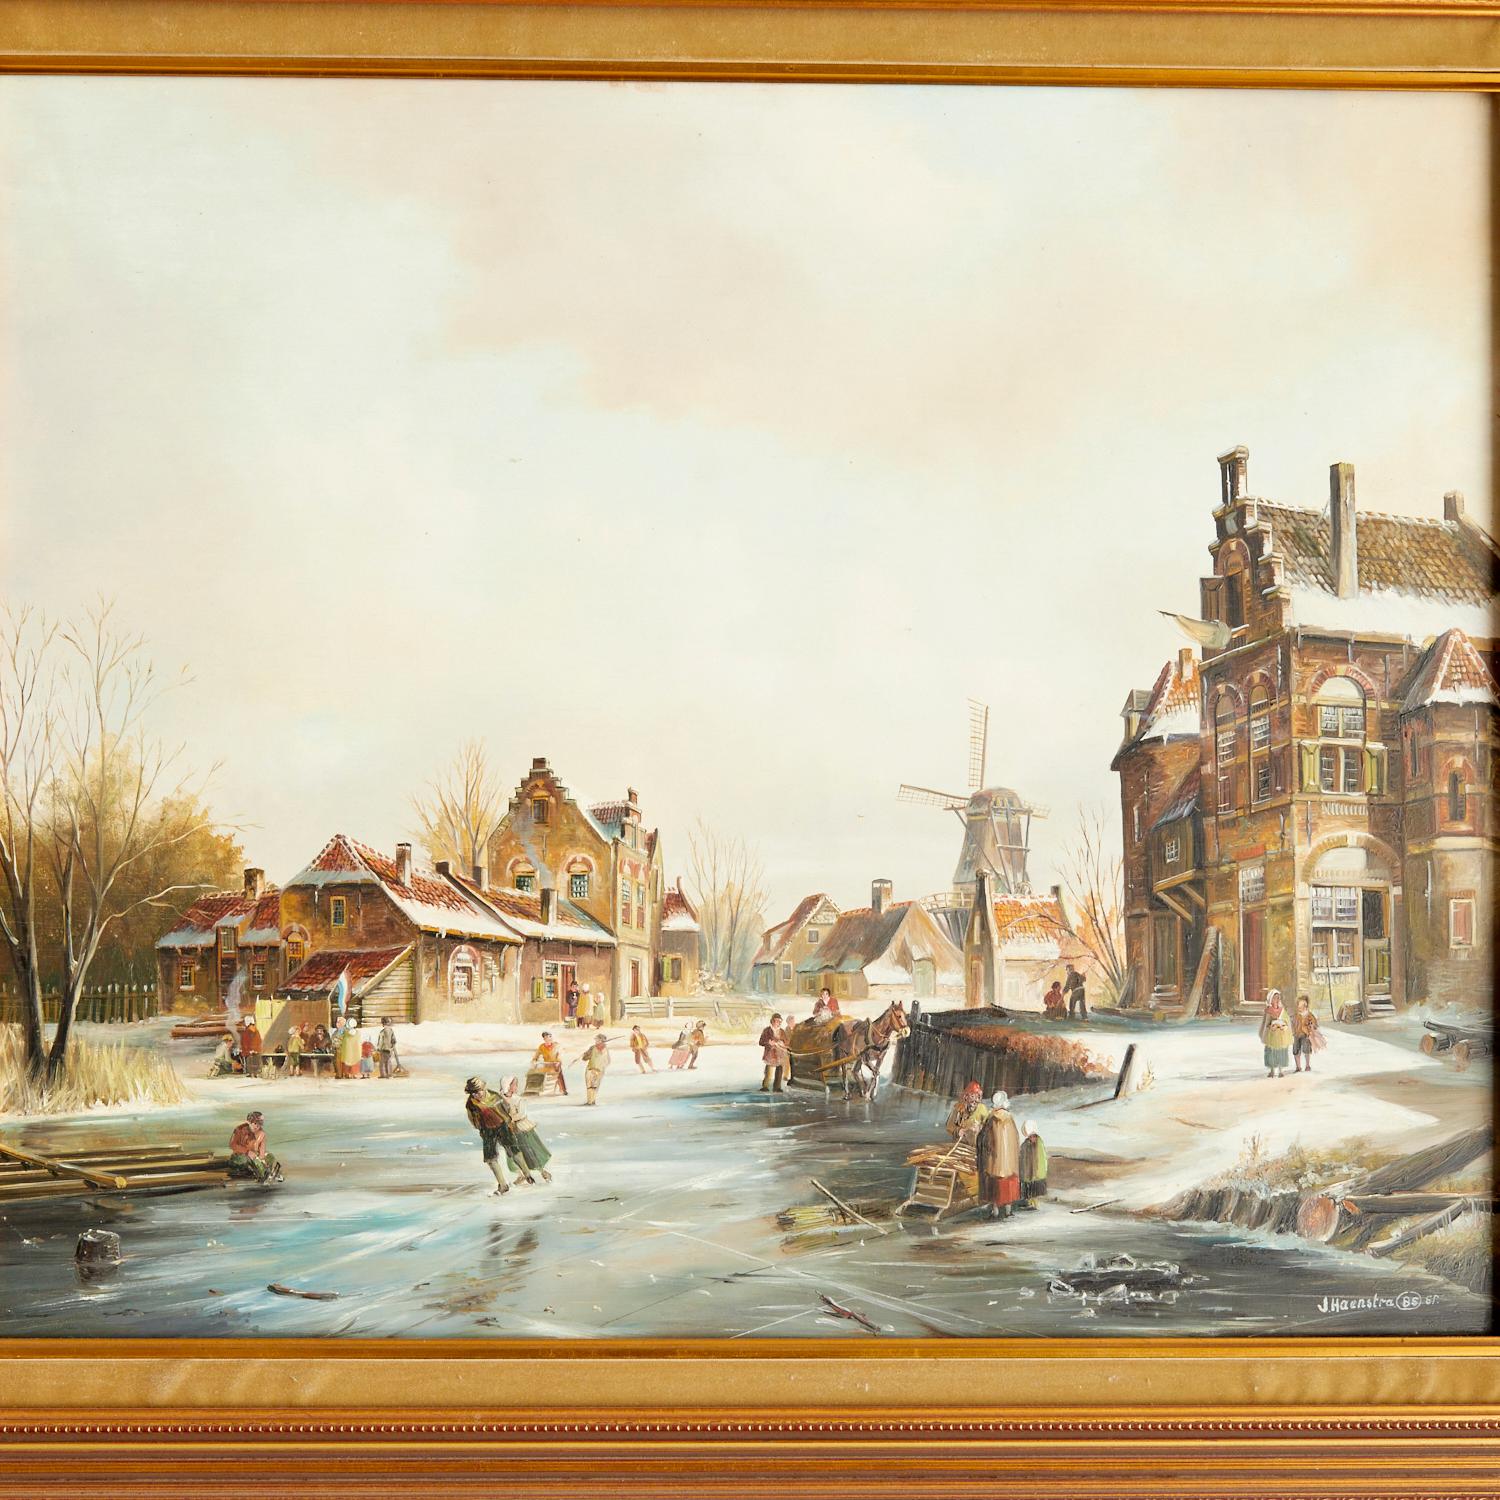 John Haanstra (Dutch, b. 1940), signed and dated 1985 on lower right. A charming oil painting, showing a winter landscape. Skaters are enjoying seasonal fun on a frozen canal while others go about their daily activities. A typical Dutch windmill can